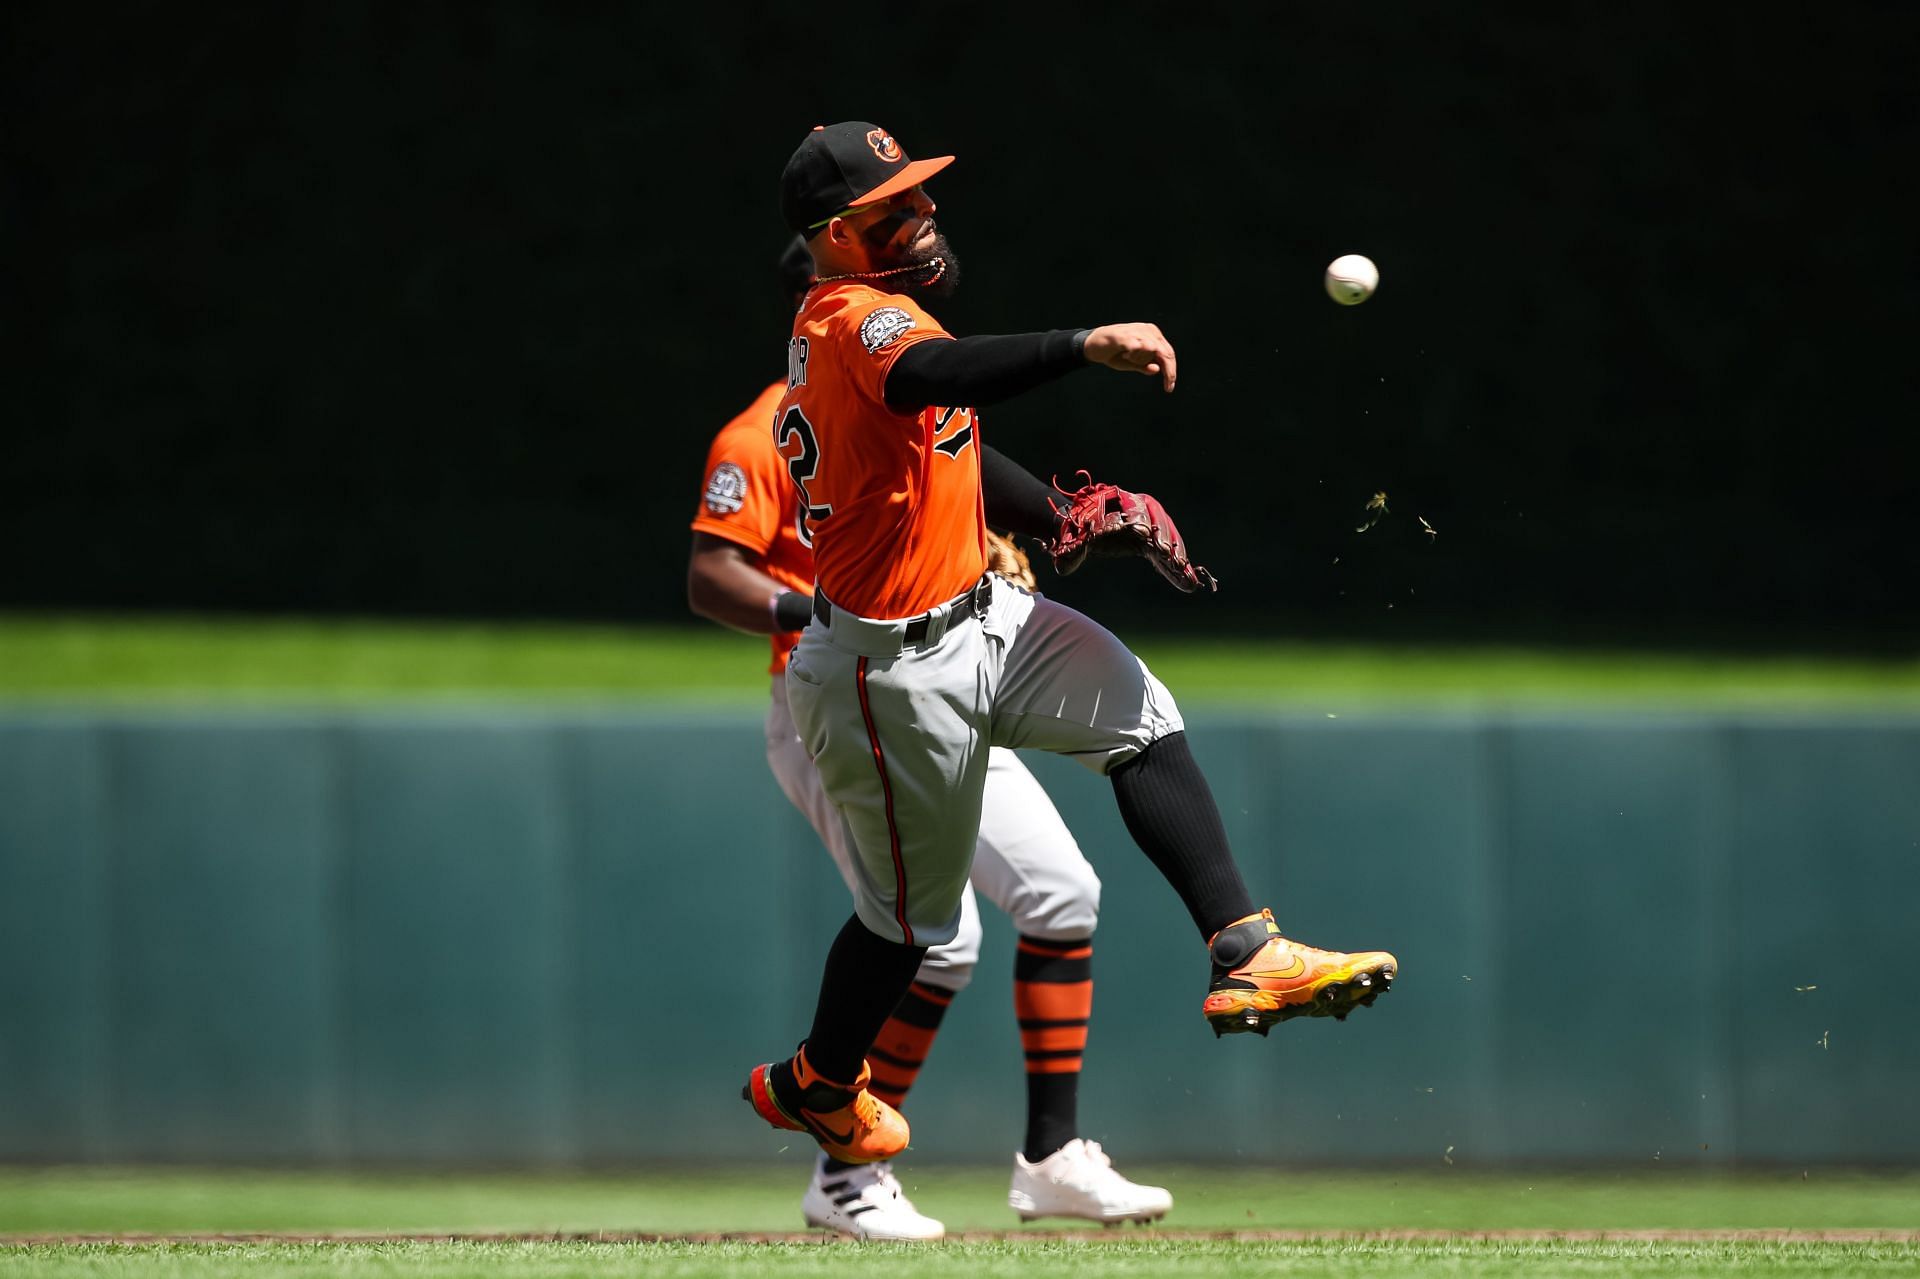 Baltimore Orioles infielder Rougned Odor threw out Cory Seager at first base after fielding a ground ball in shallow right field.